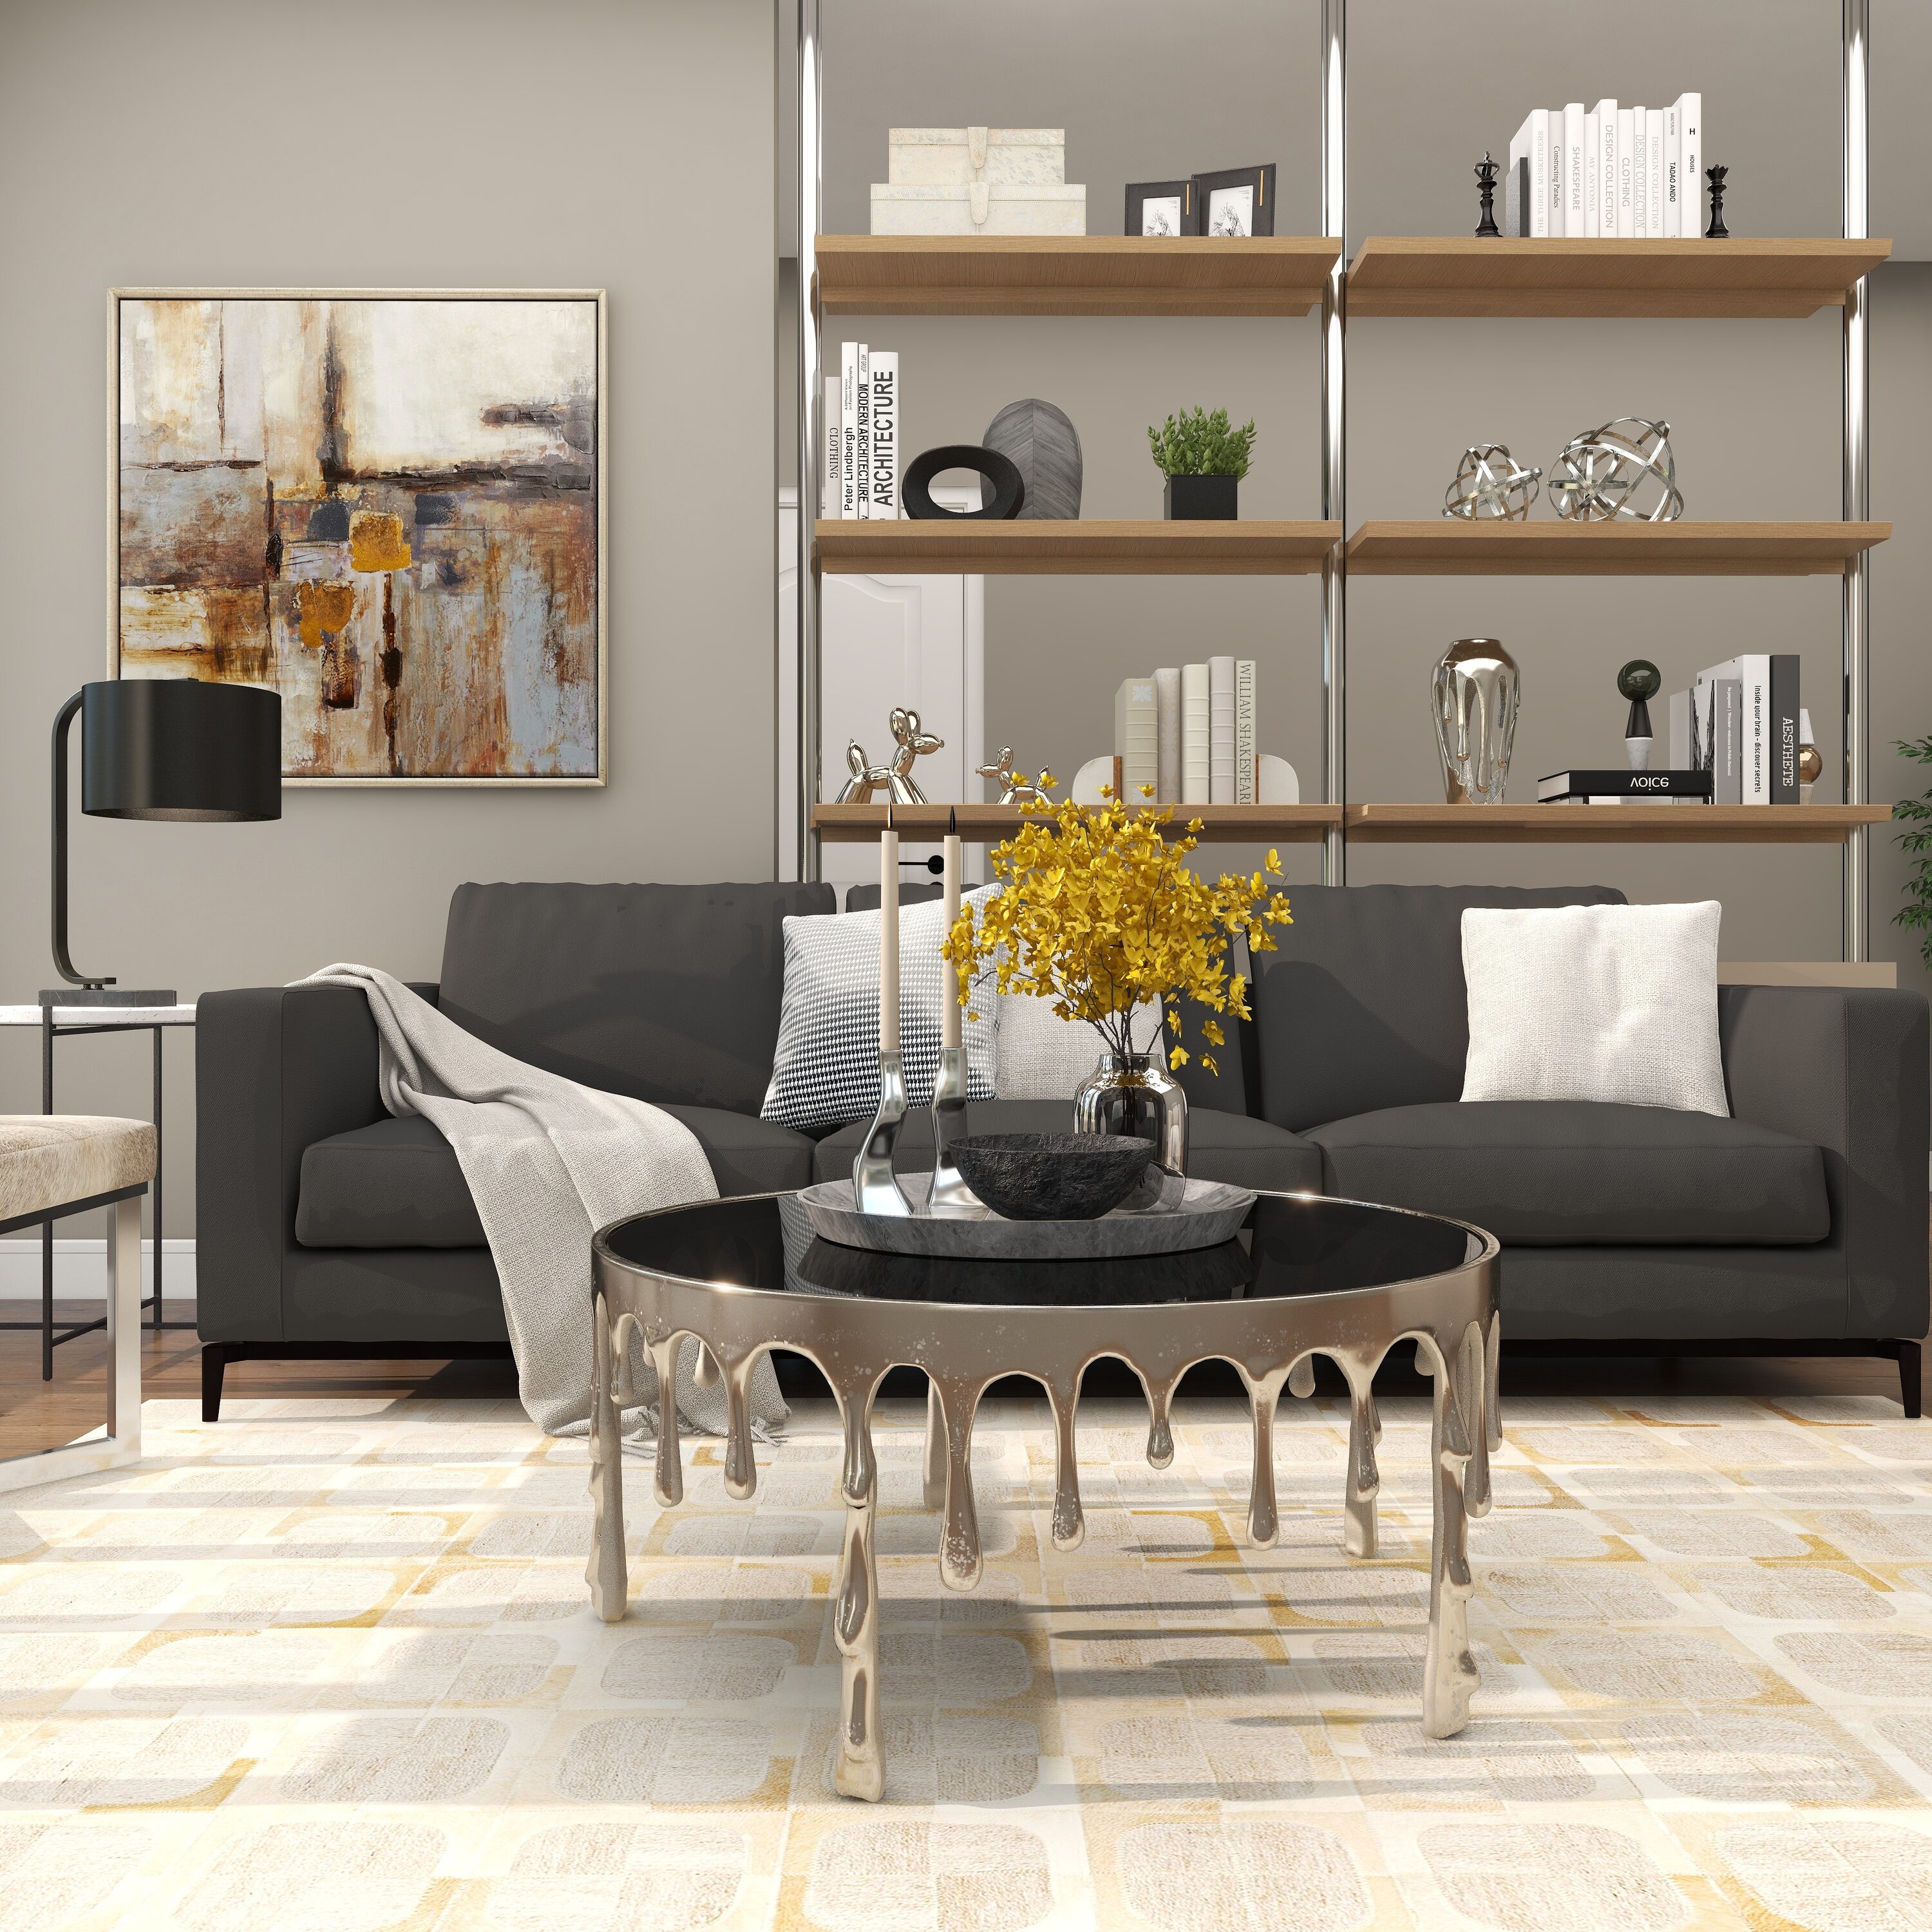 Shop Grayson Lane Neutral Modern Living Room Collection at Lowes.com